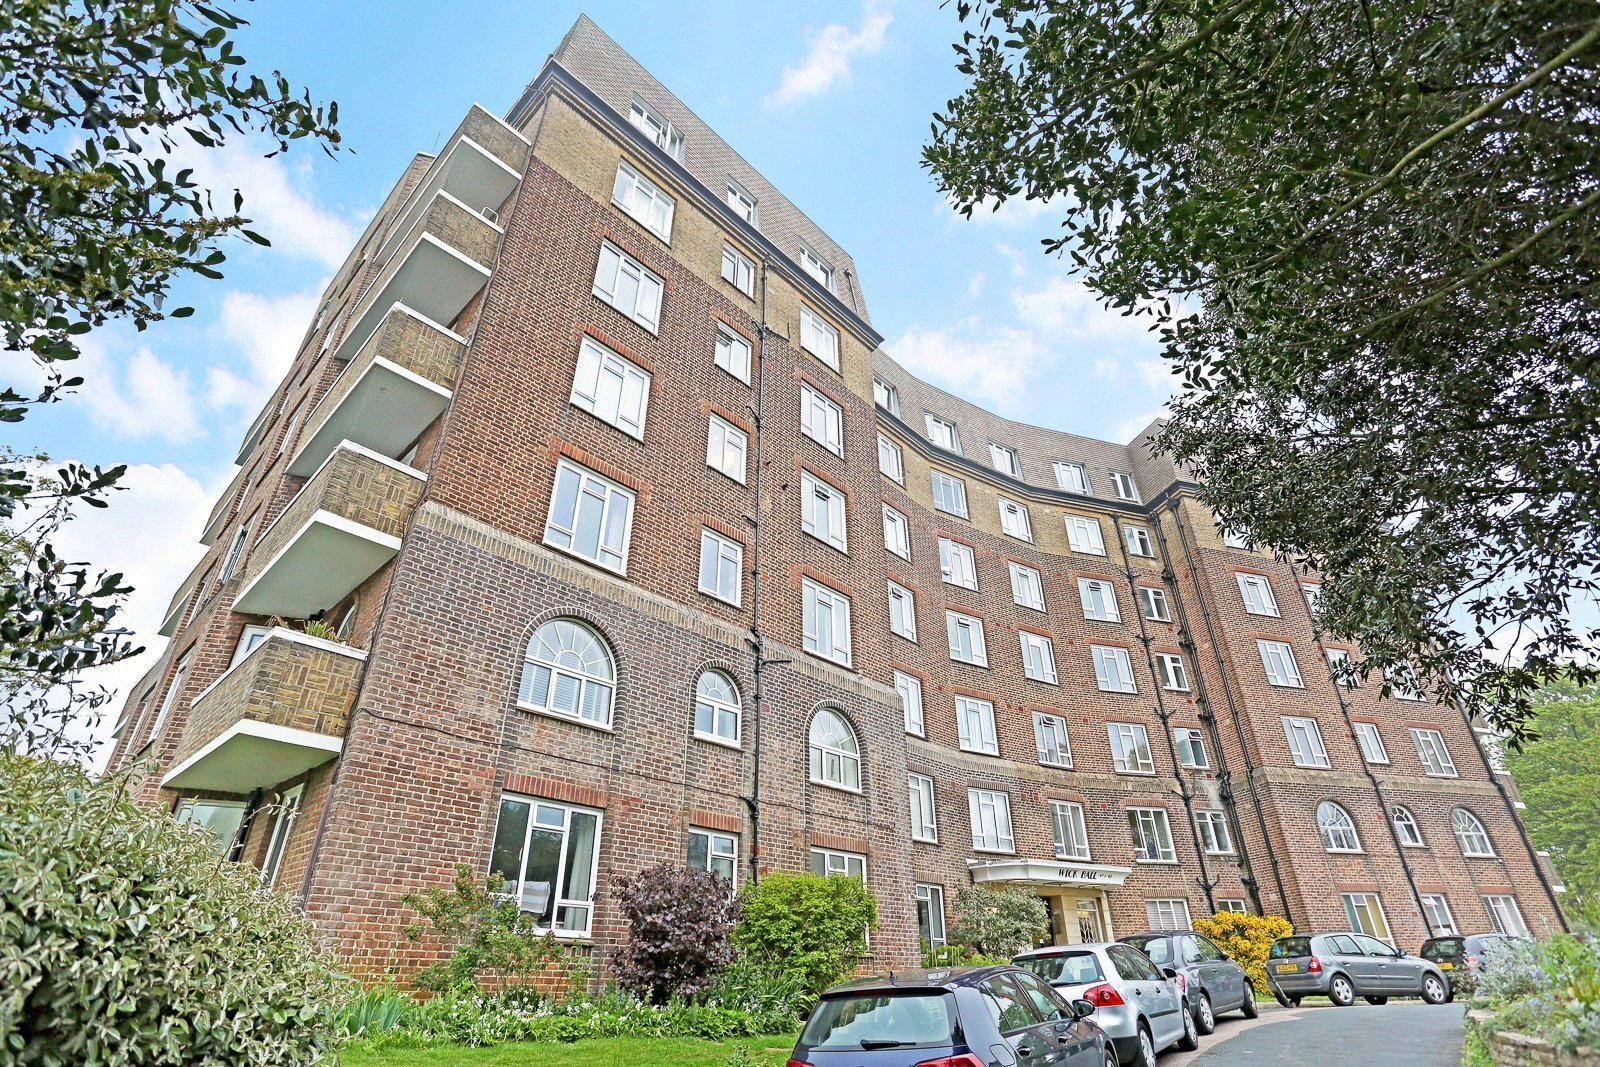 Wick Hall, Furze Hill, Hove, BN3 1NF